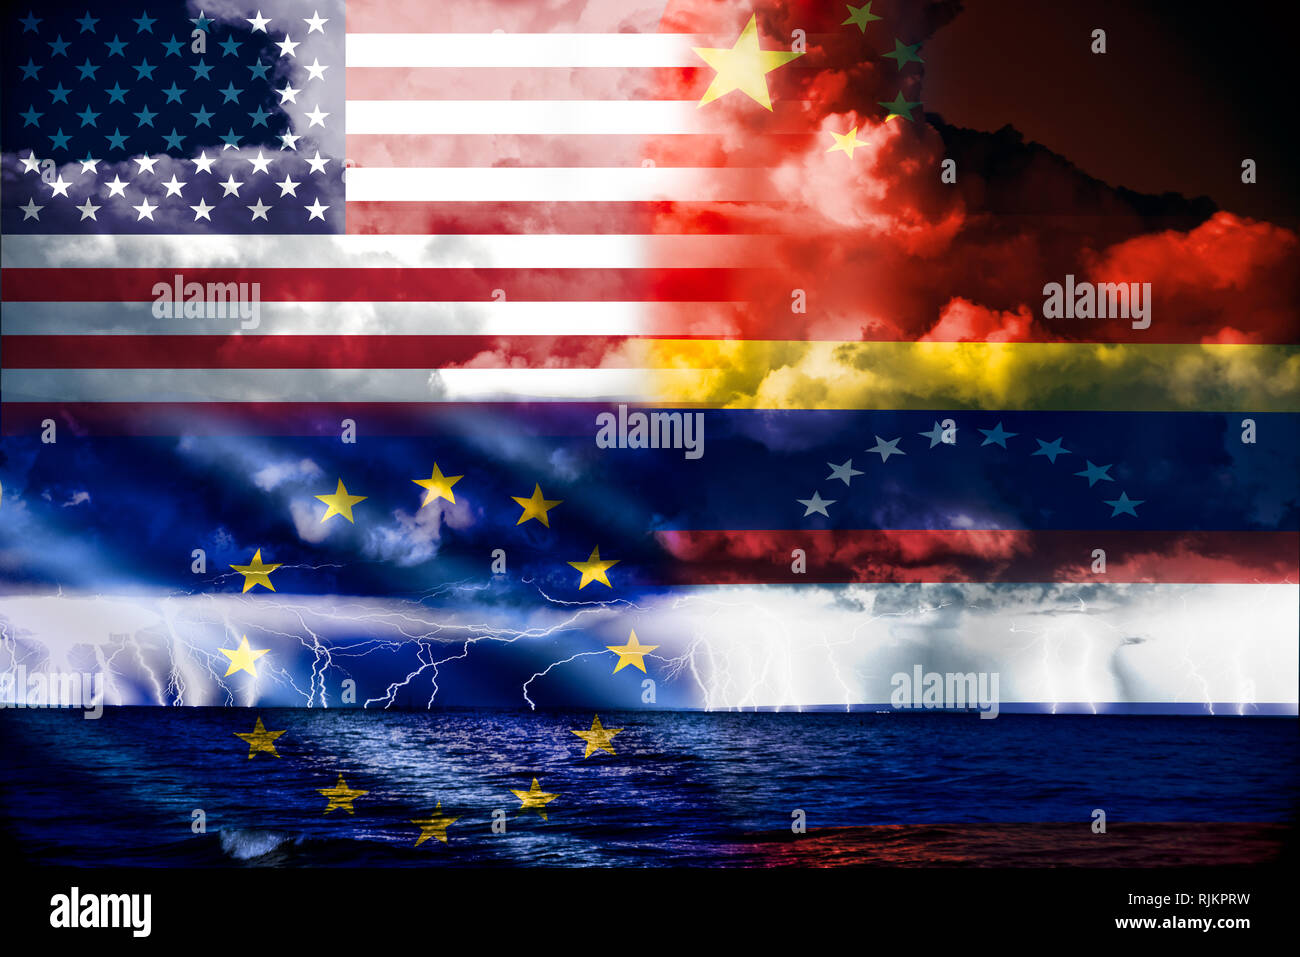 Ongoing conflict in venezuela,conceptuall image with a sea thunderstorm and the flag of venezuela,russia and china opposed to that of europe and usa,  Stock Photo